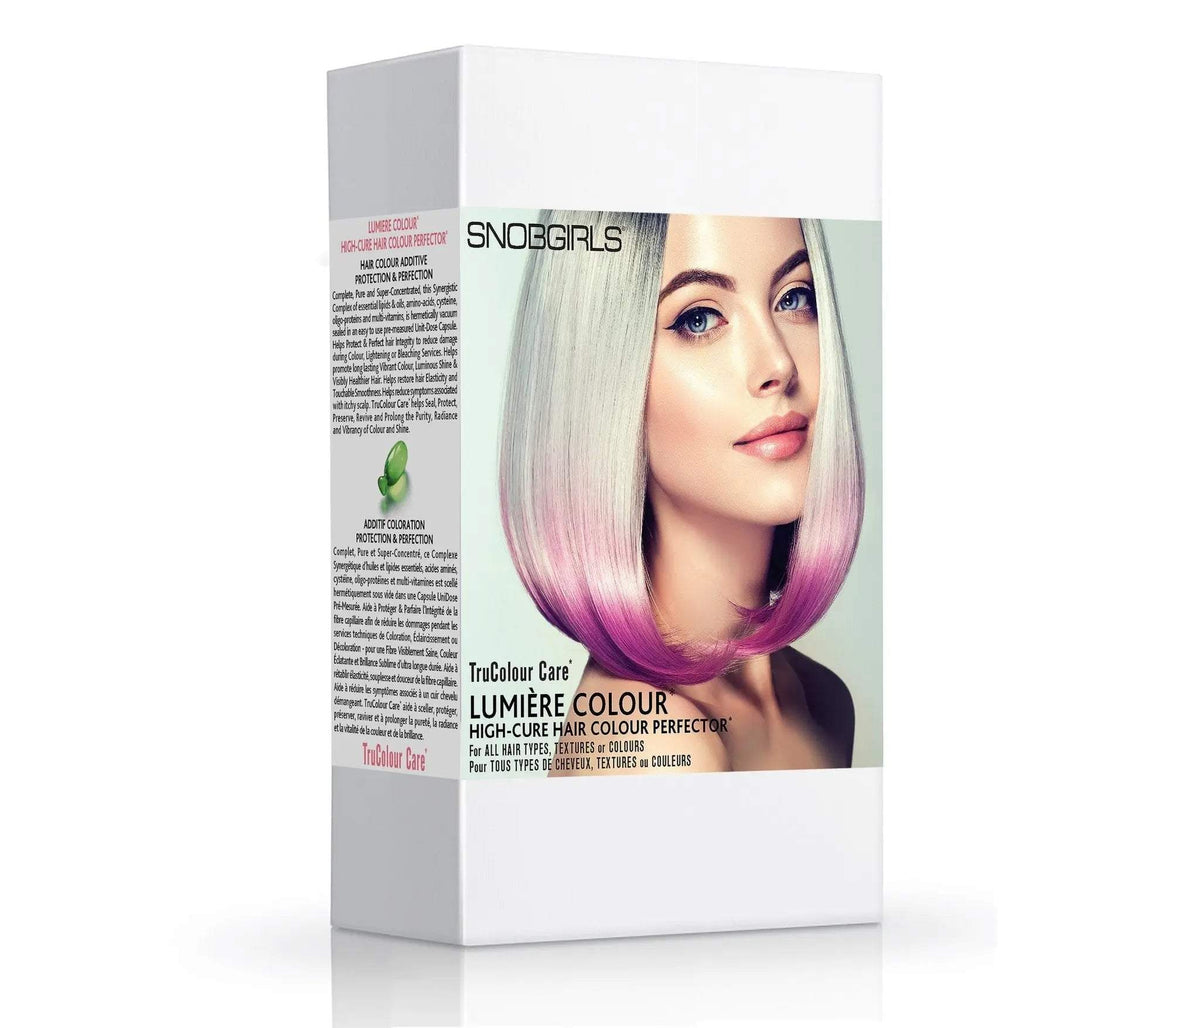 PRO BACKBARBOX HAIR COLOUR ADDITIVE PROTECTION &amp; PERFECTION - SNOBGIRLS Canada